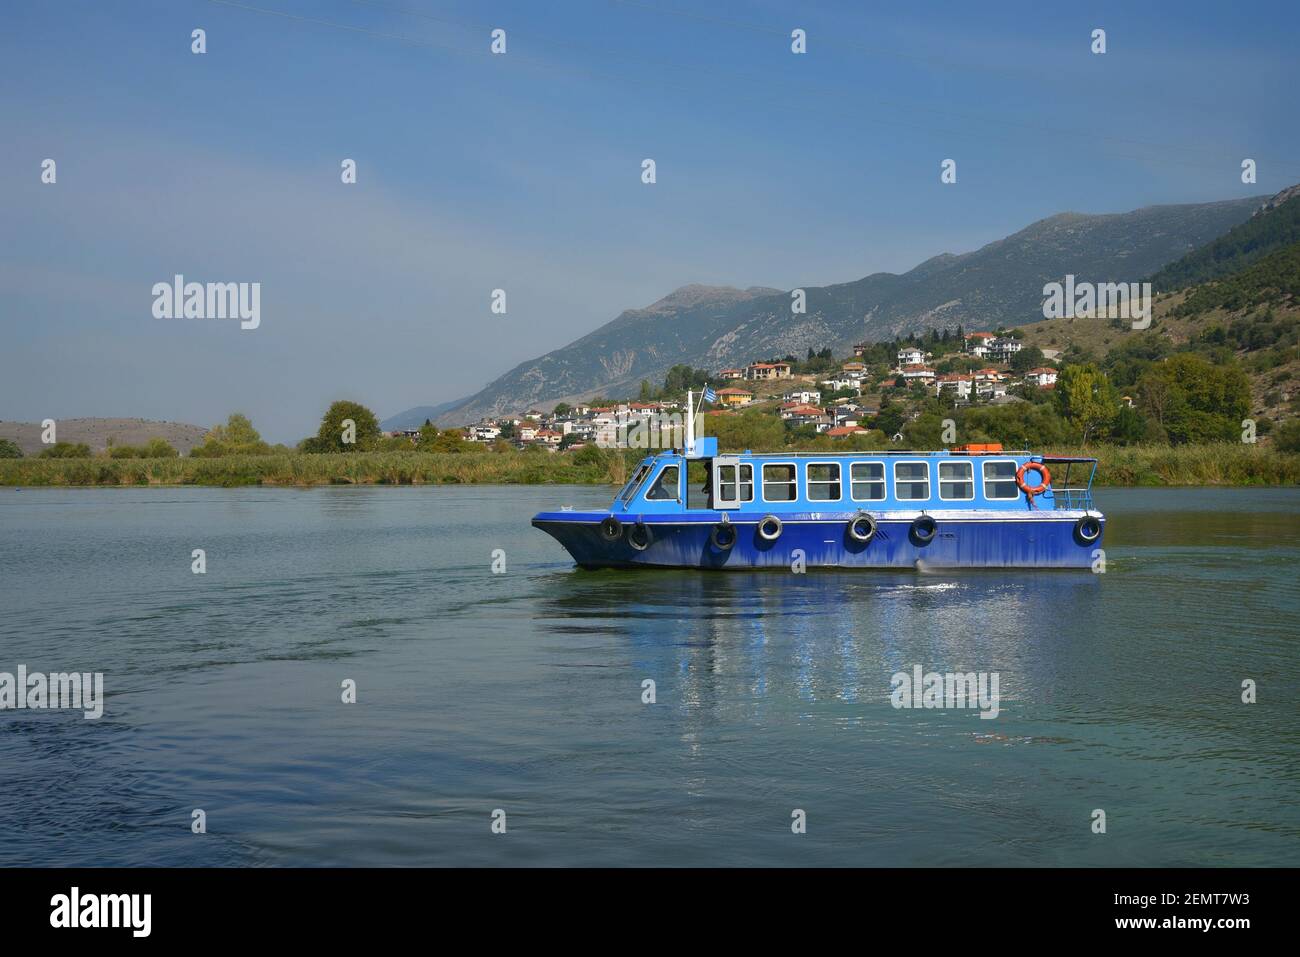 Landscape with a traditional tour boat on Pamvotis Lake in Ioannina, Epirus Greece. Stock Photo